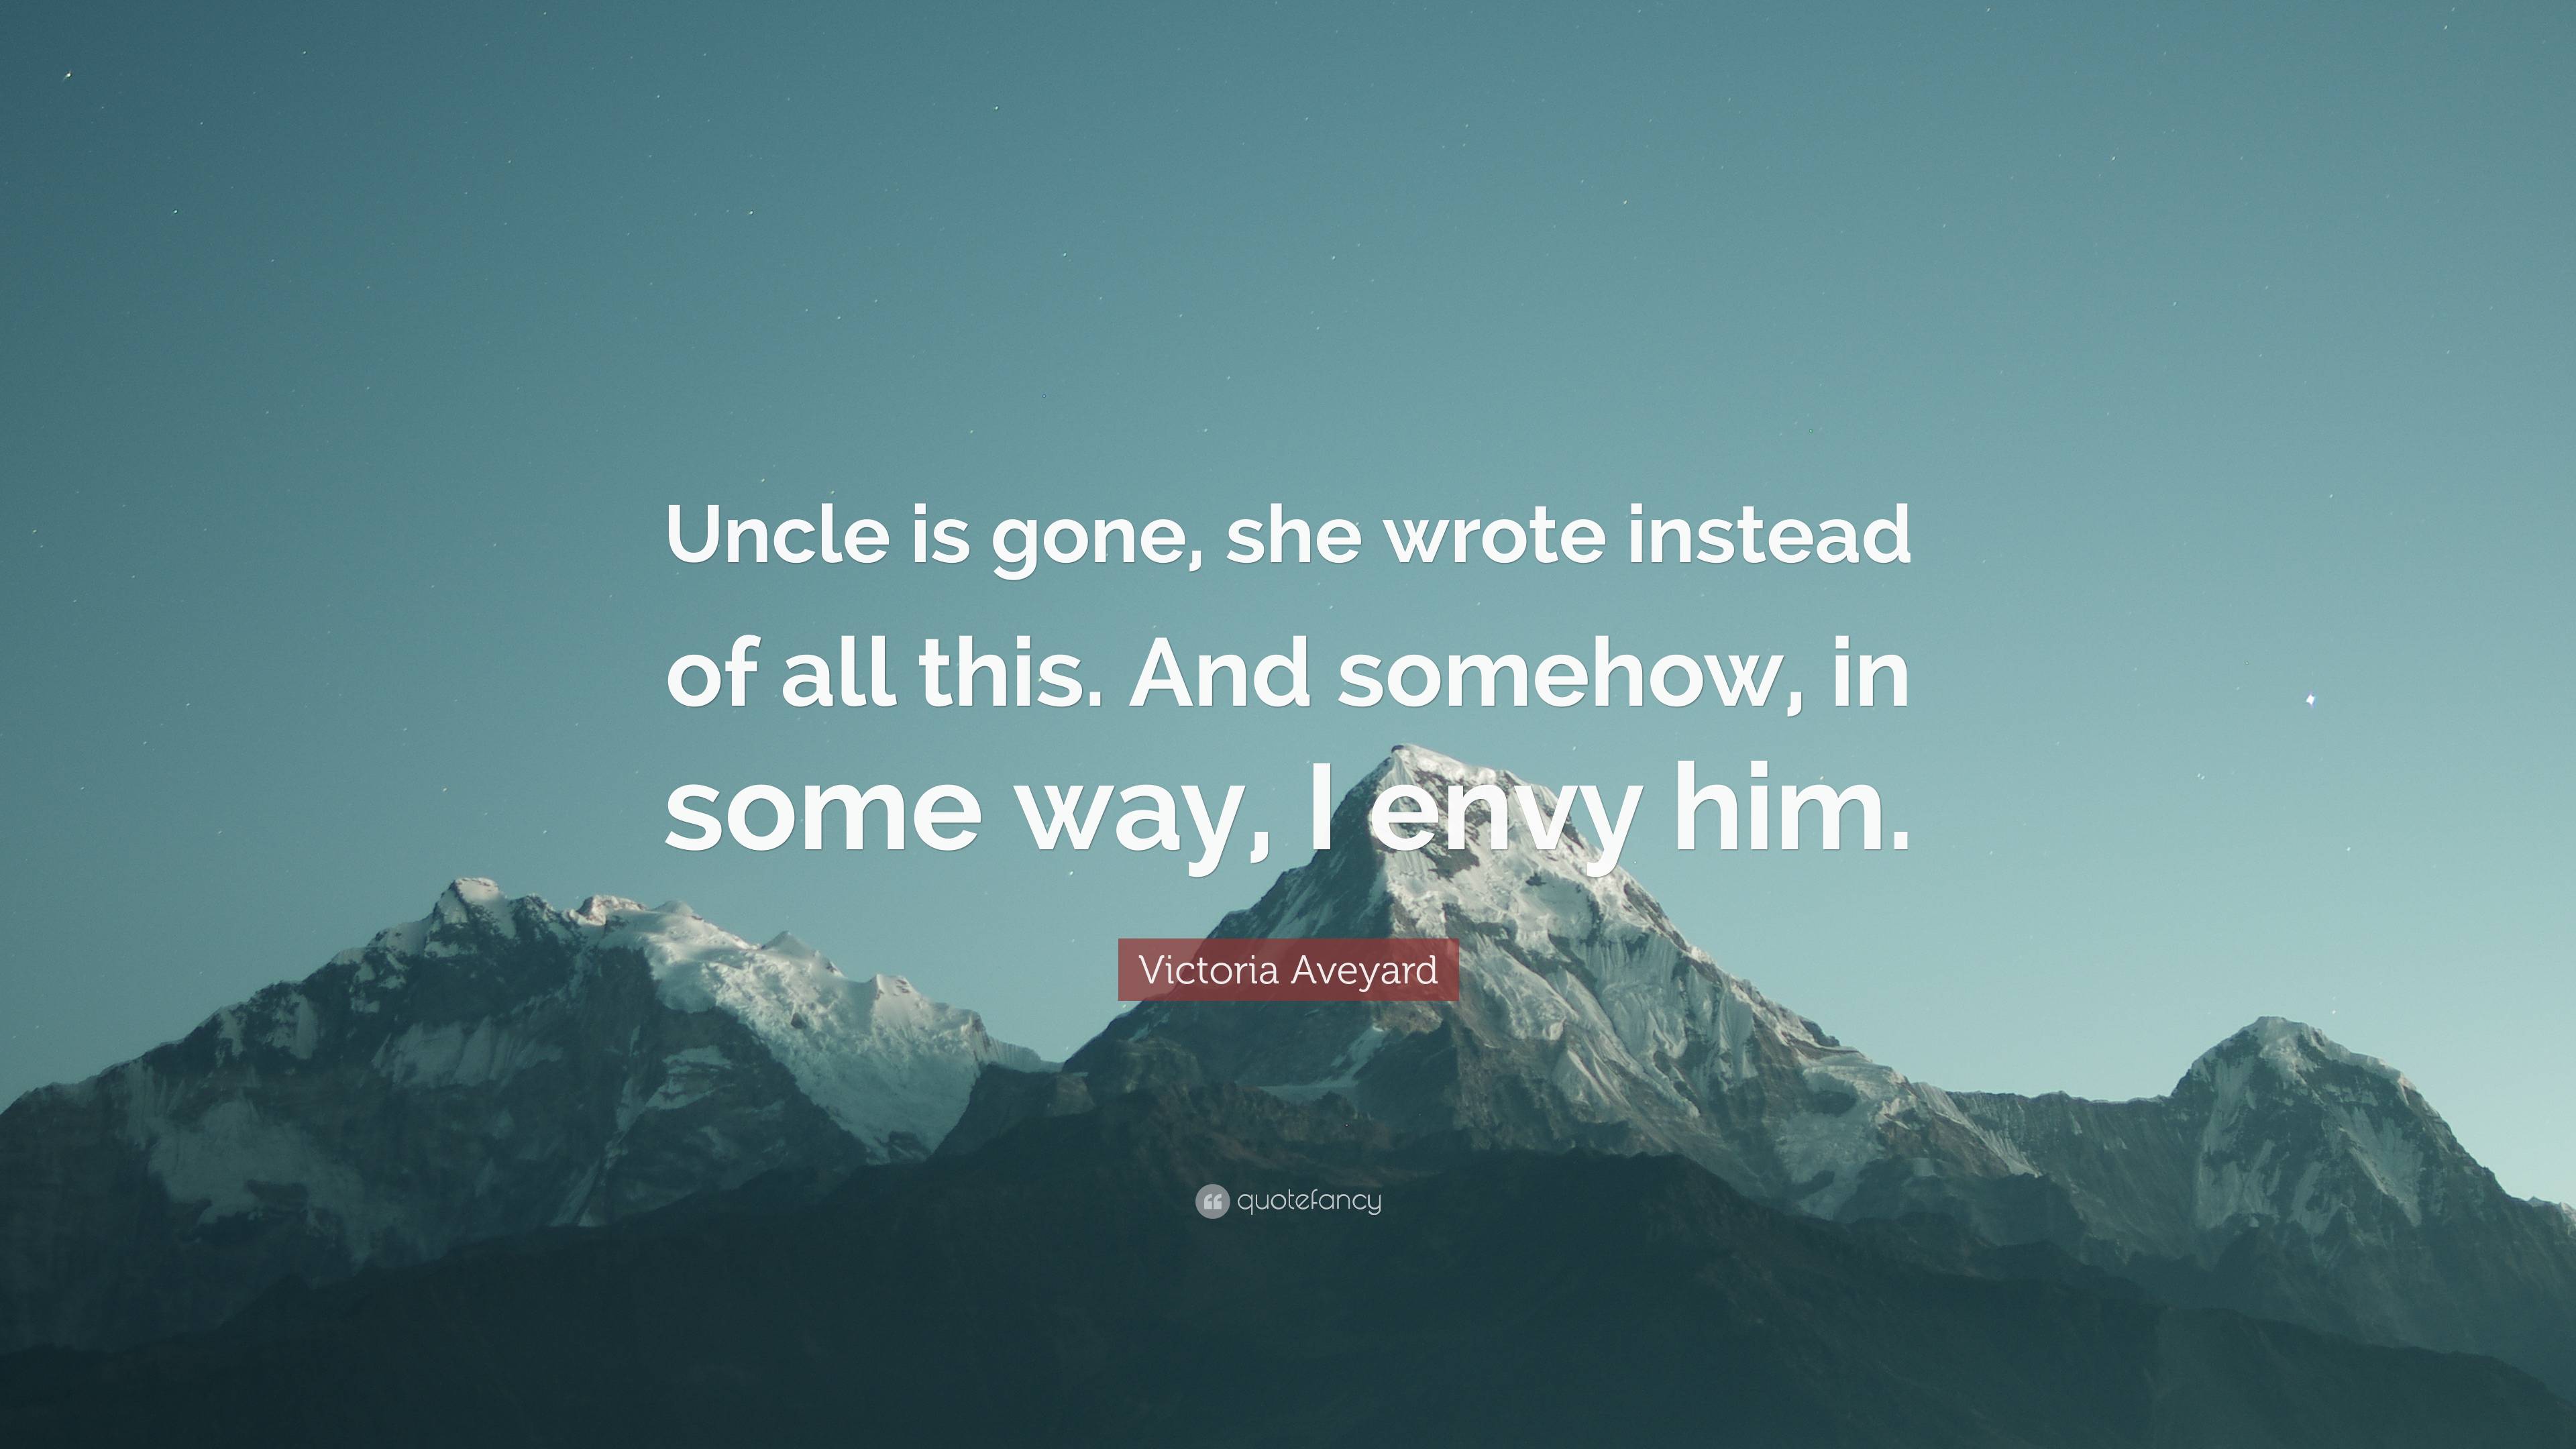 Victoria Aveyard Quote: “Uncle is gone, she wrote instead of all this ...